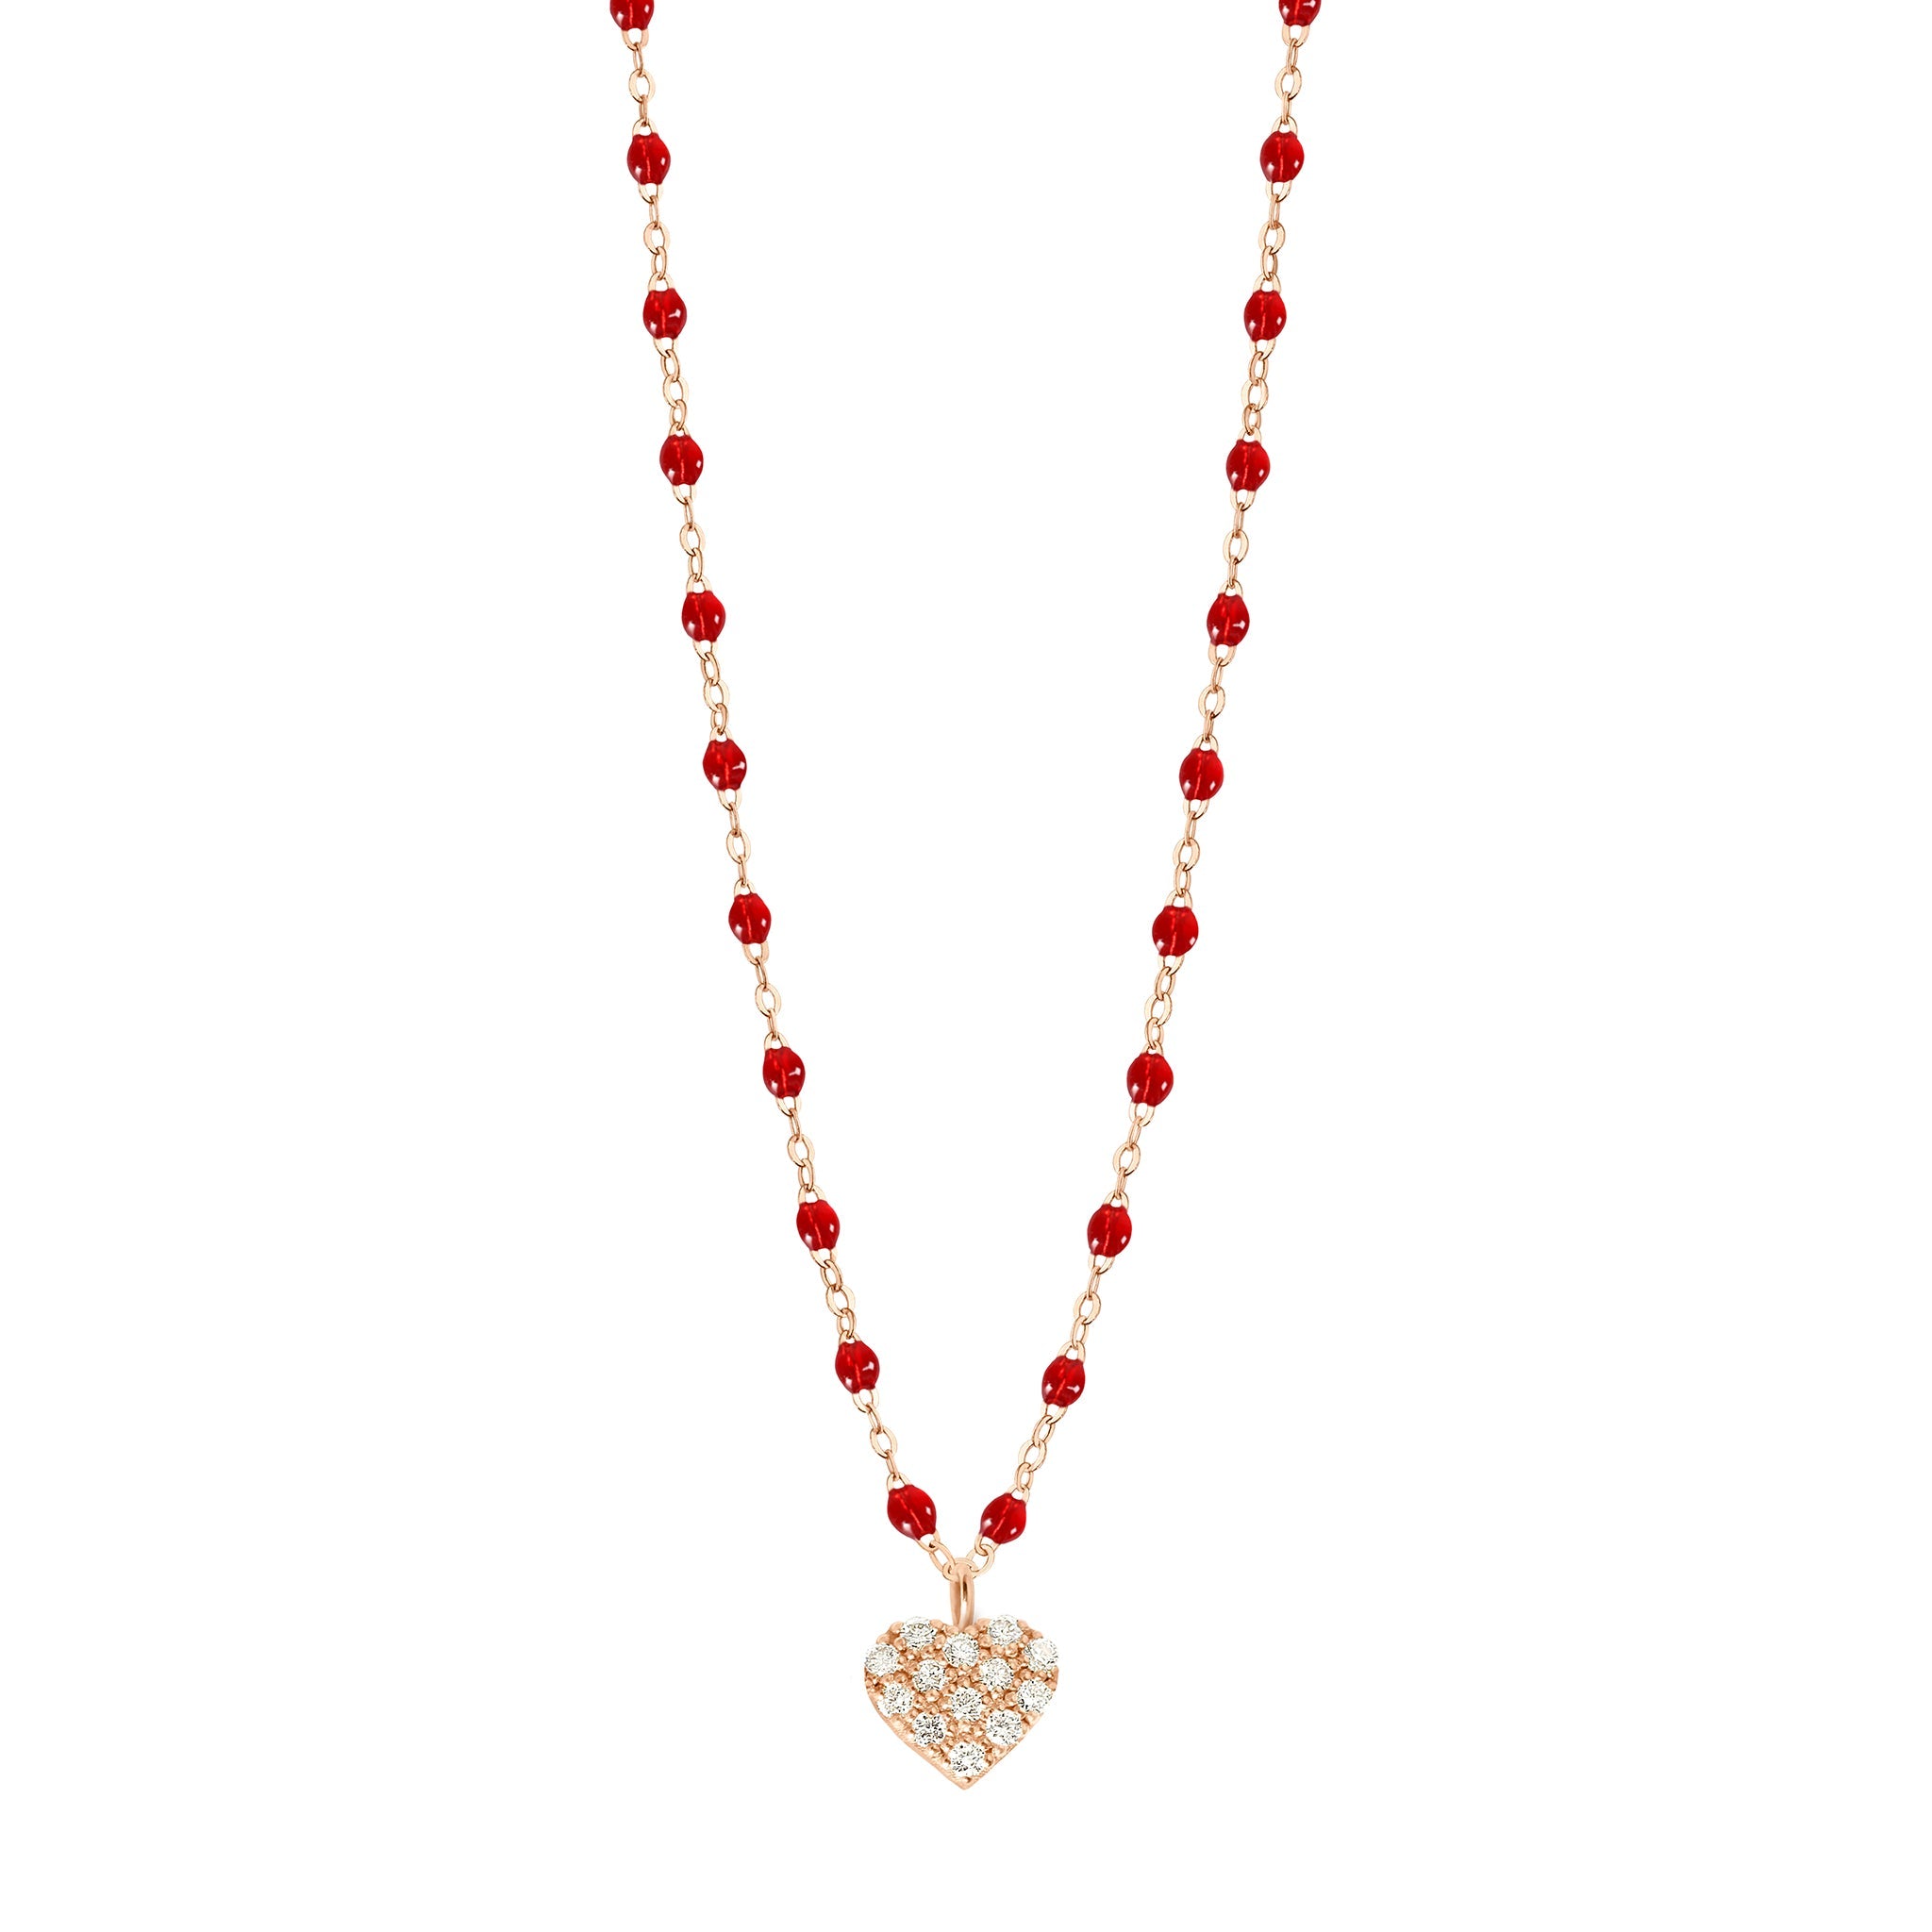 Collier rubis In Love, diamants, or rose, 42 cm in love Référence :  b1il001r3242di -1